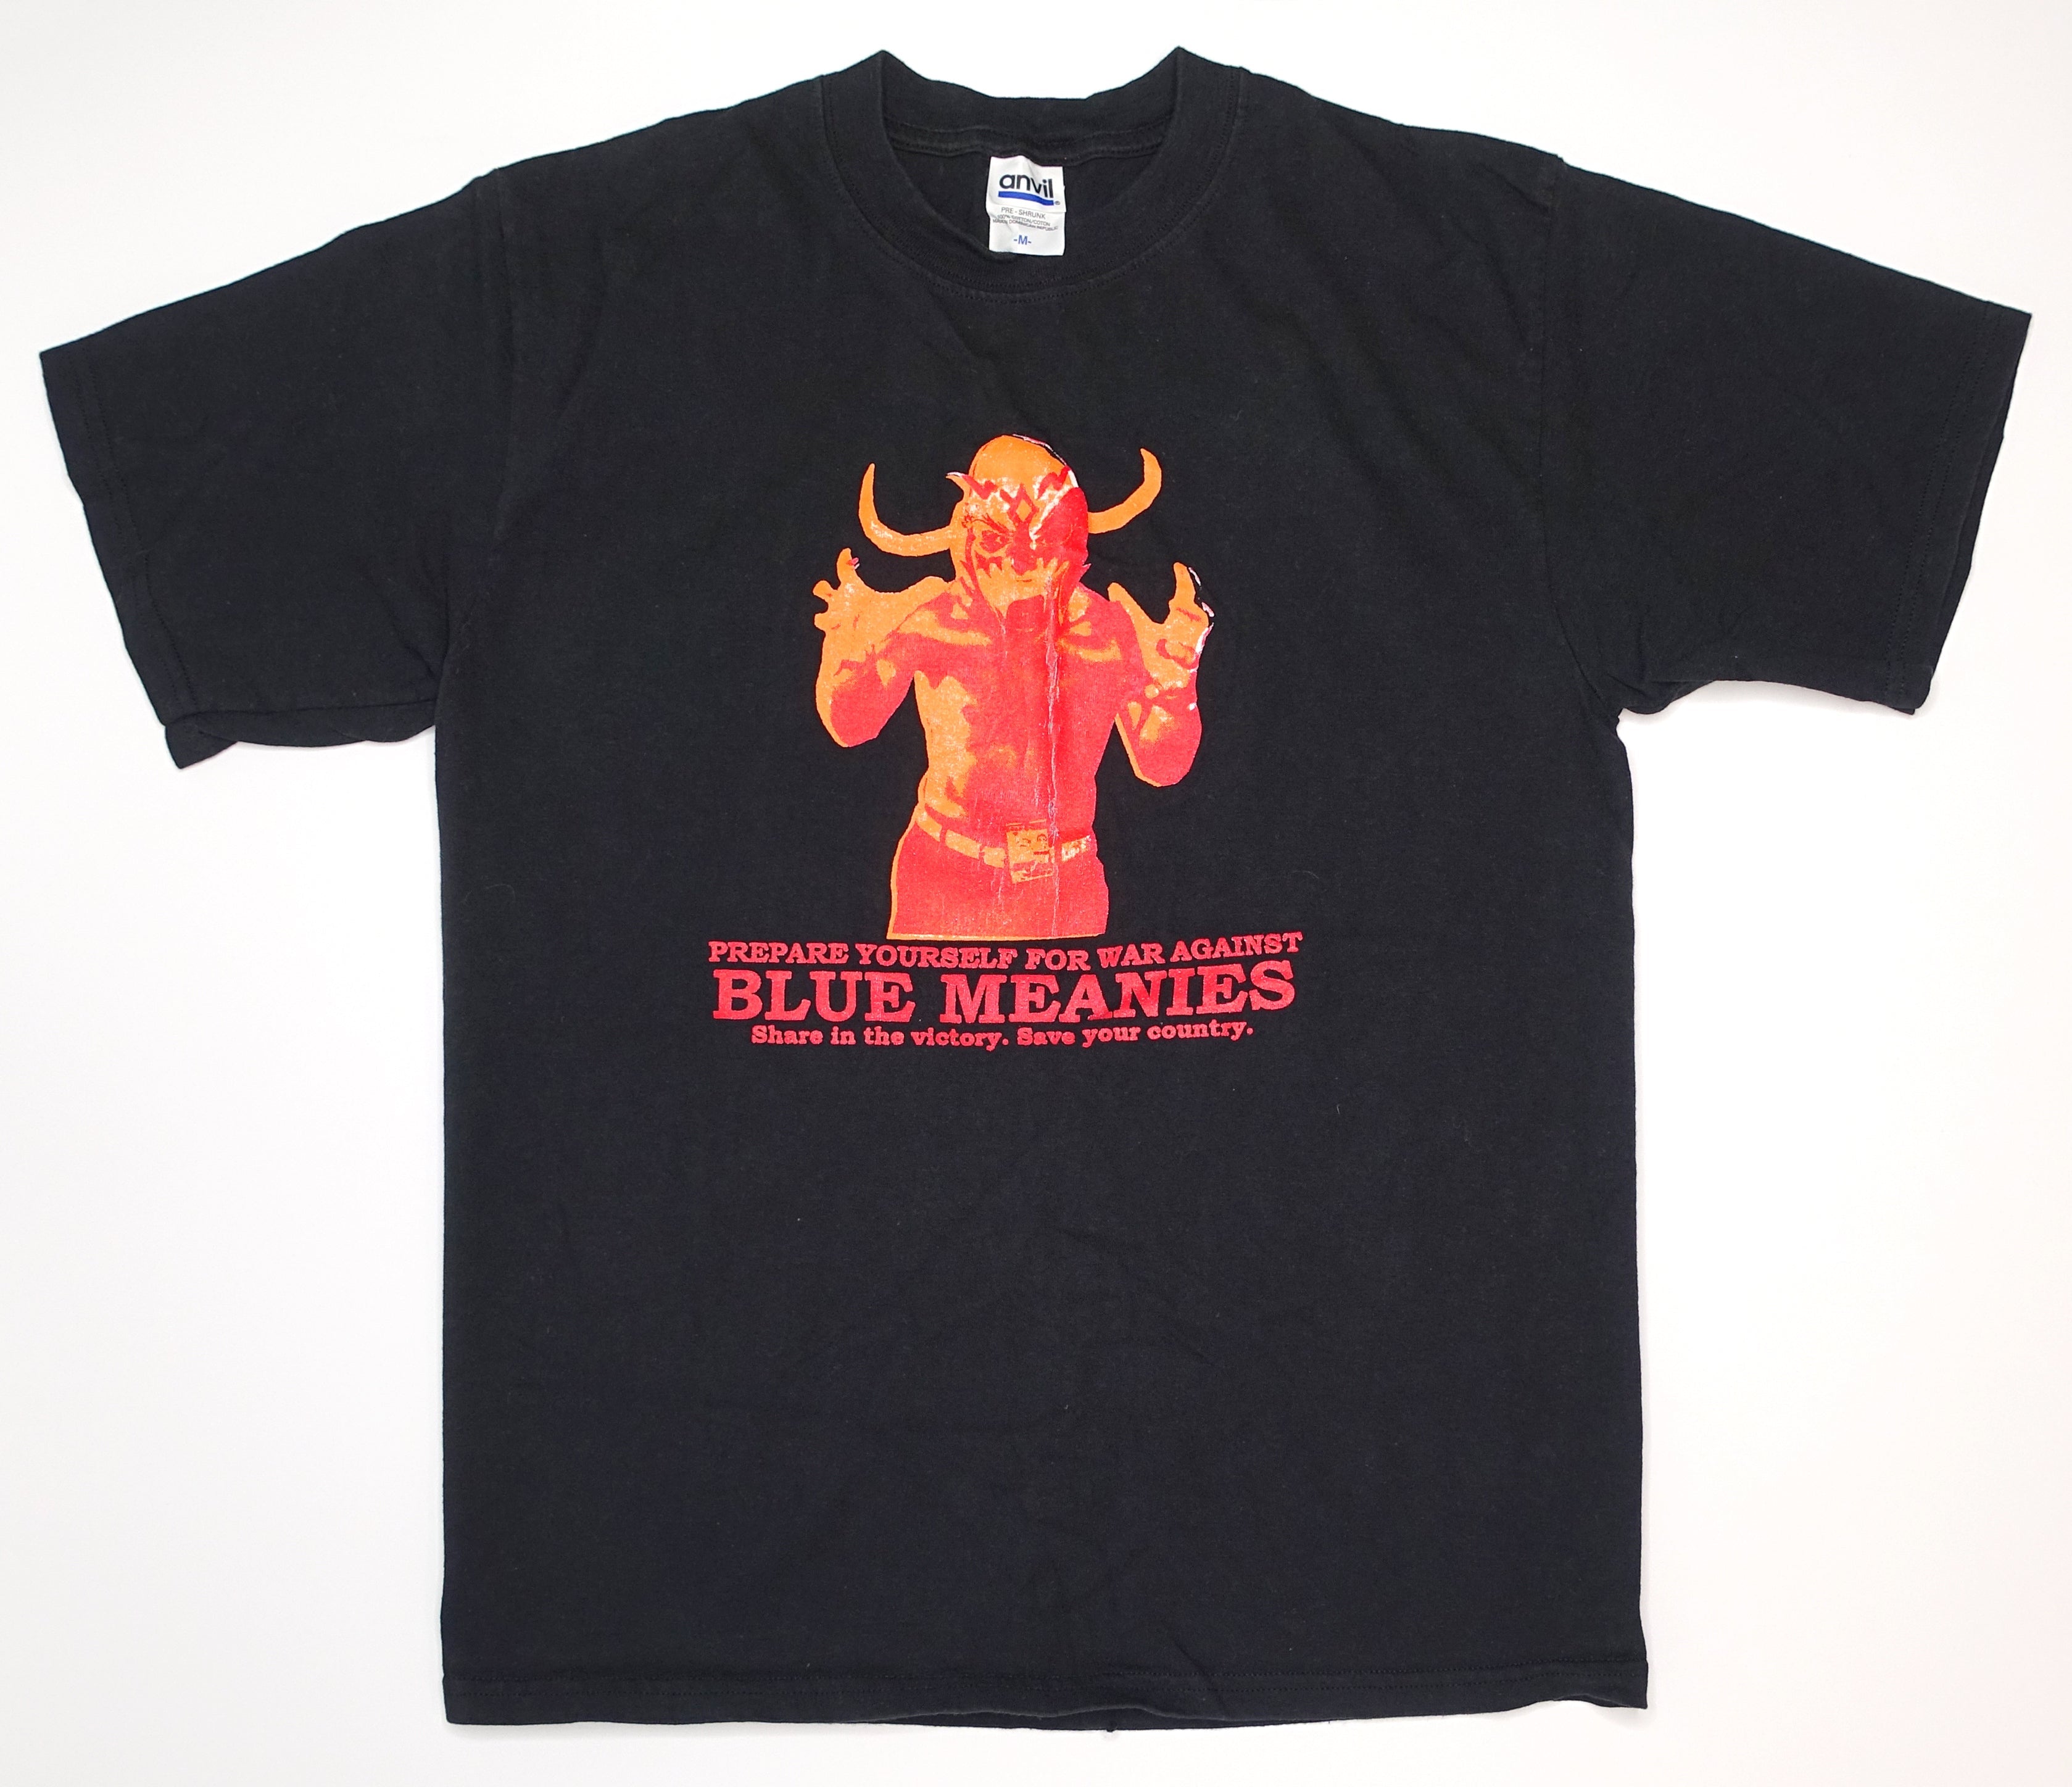 Blue Meanies – Prepare Yourself For War Against Tour Shirt Size Medium